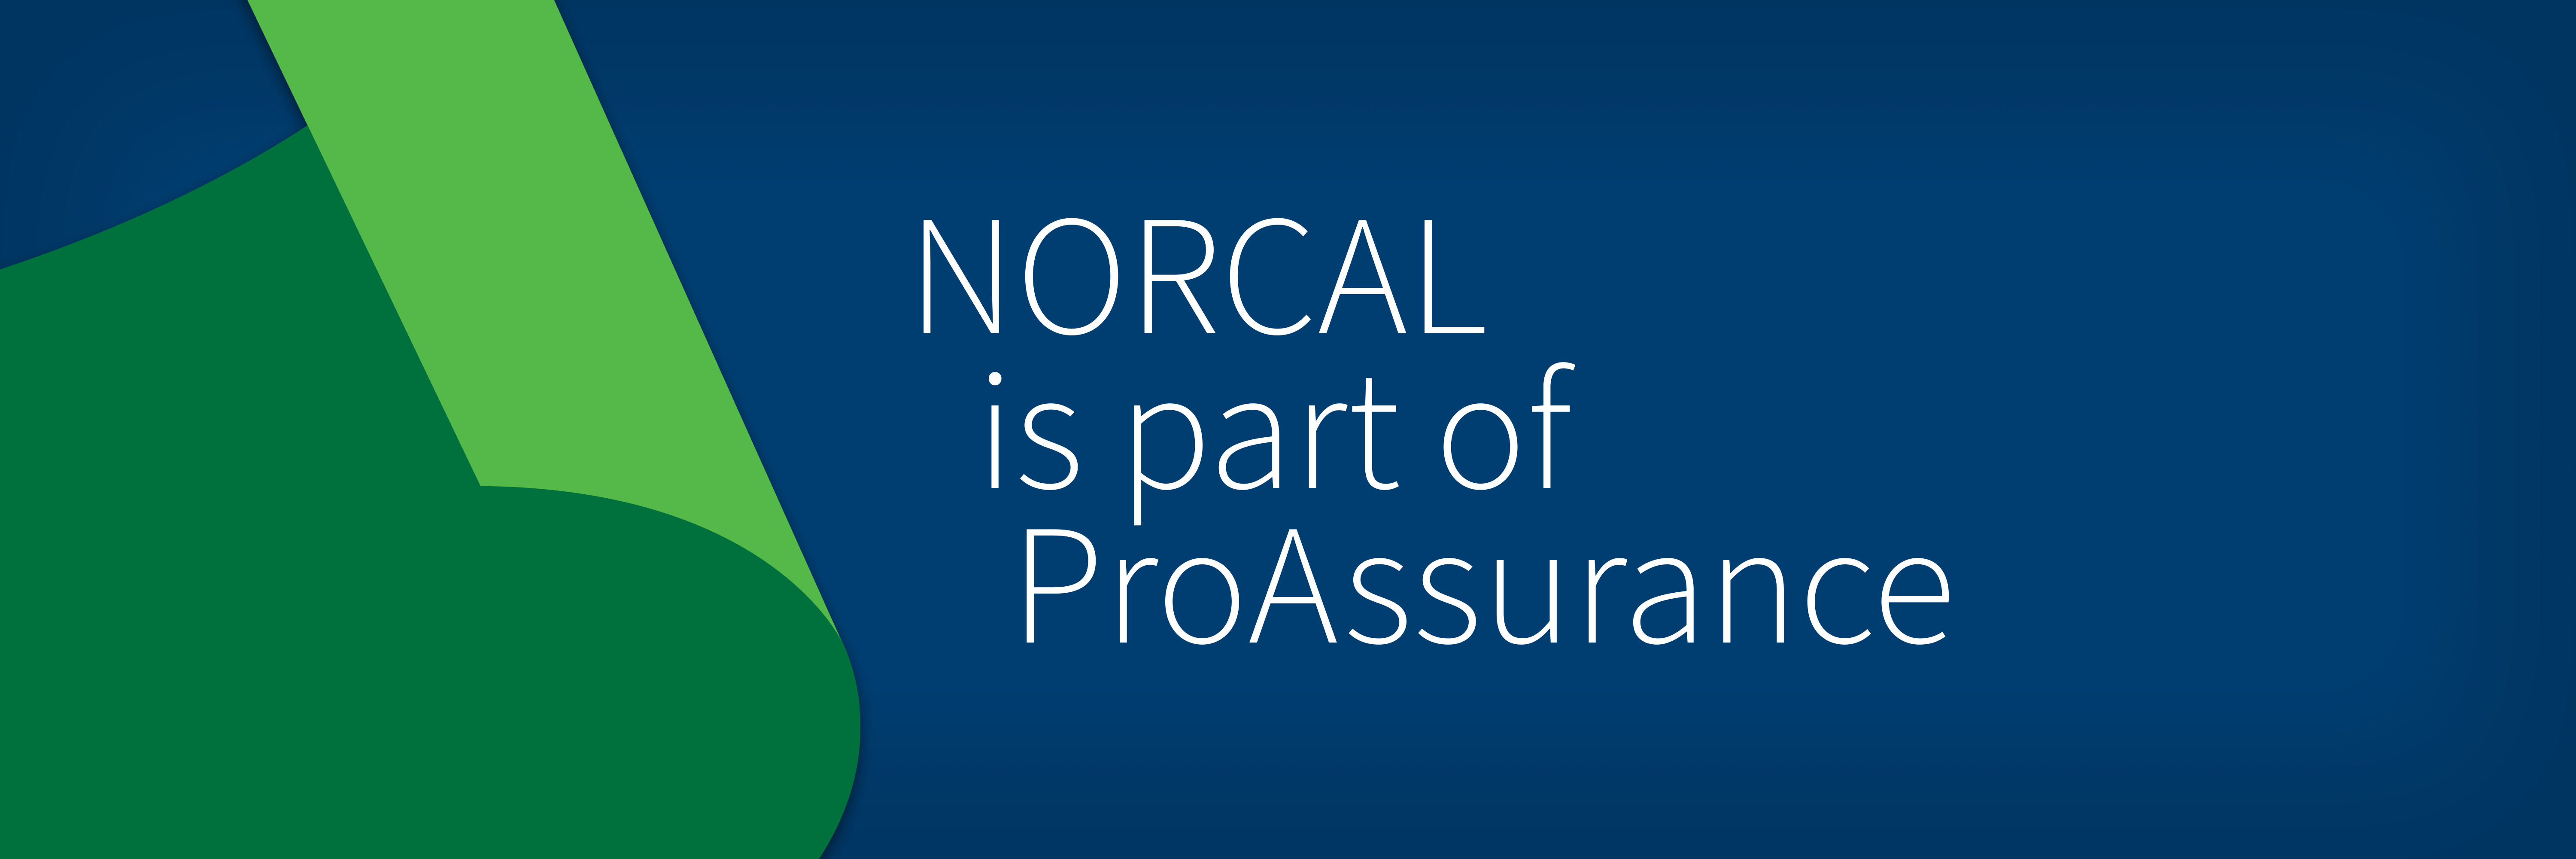 NORCAL is part of ProAssurance